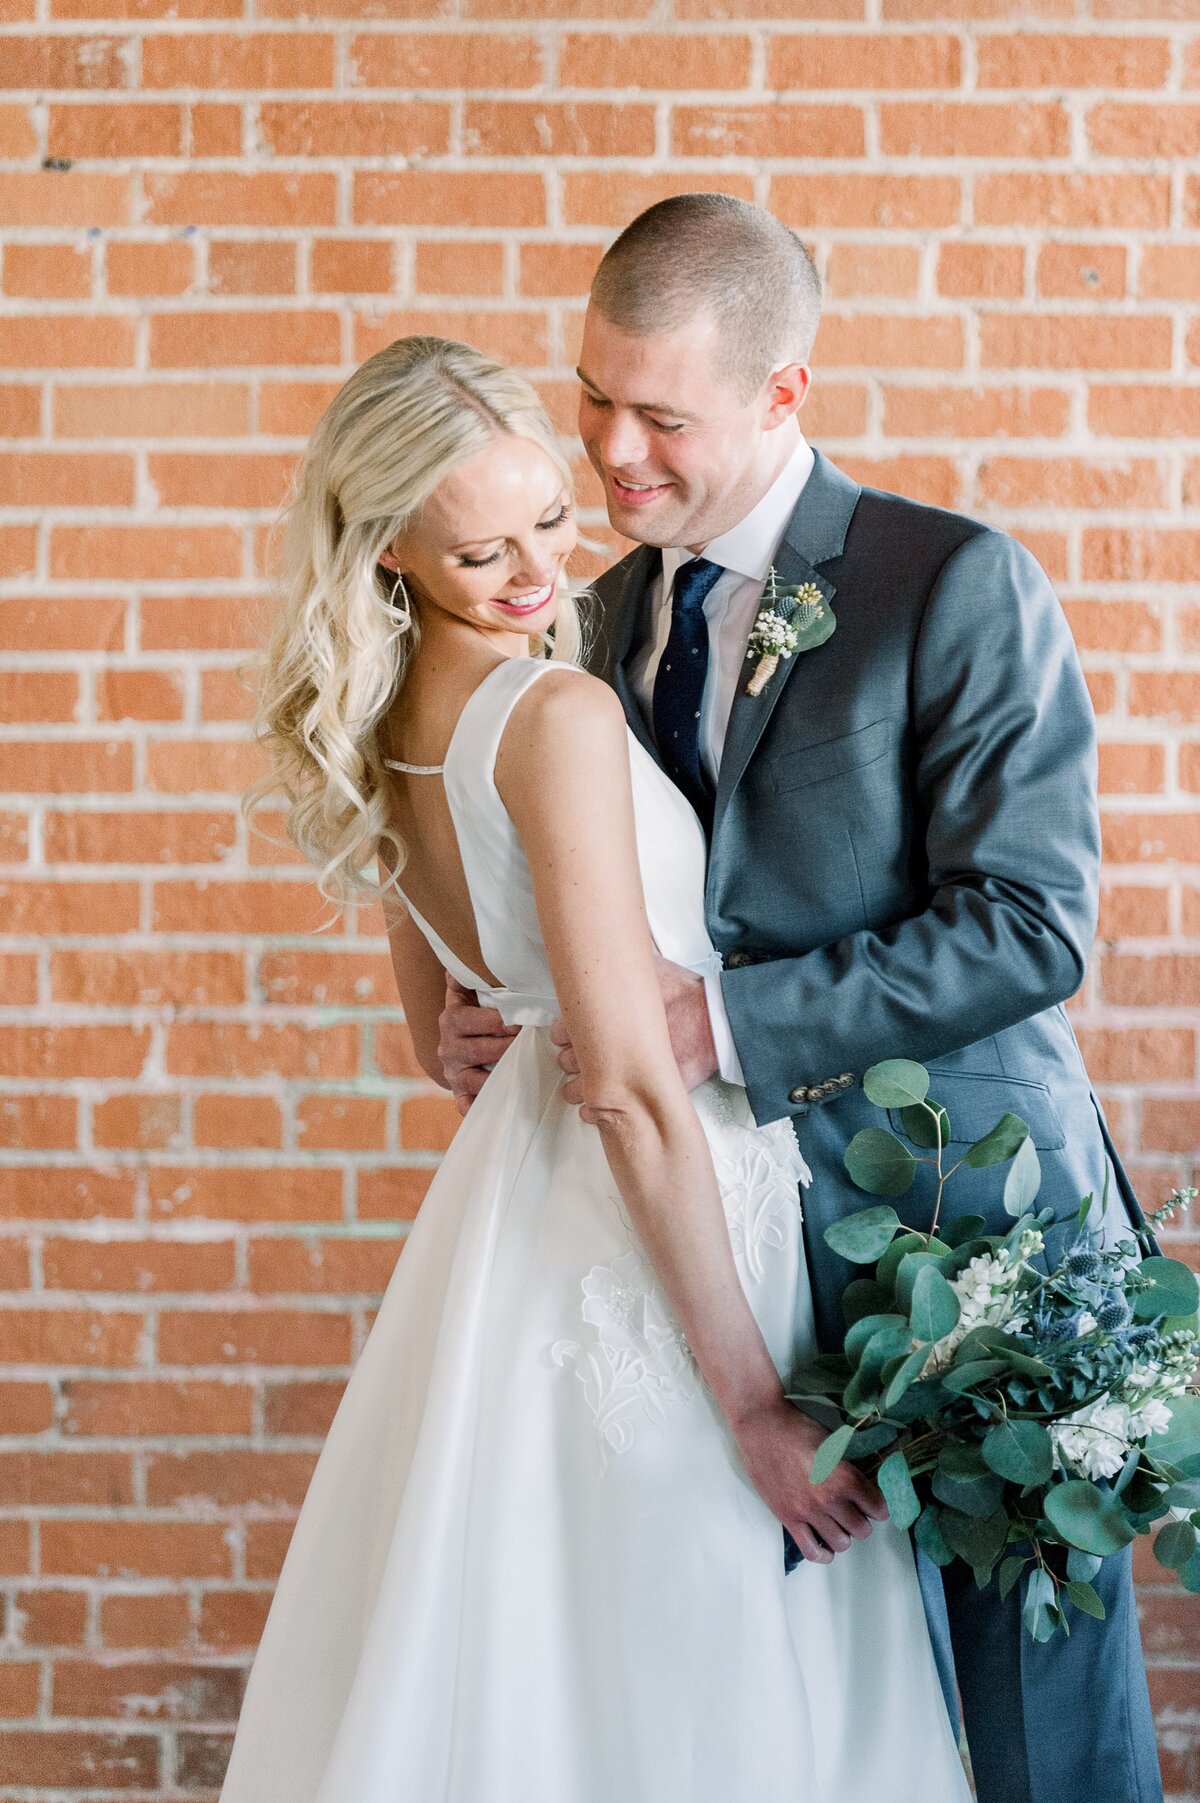 Warehouse-215-wedding-by-Leslie-Ann-Photography-00089